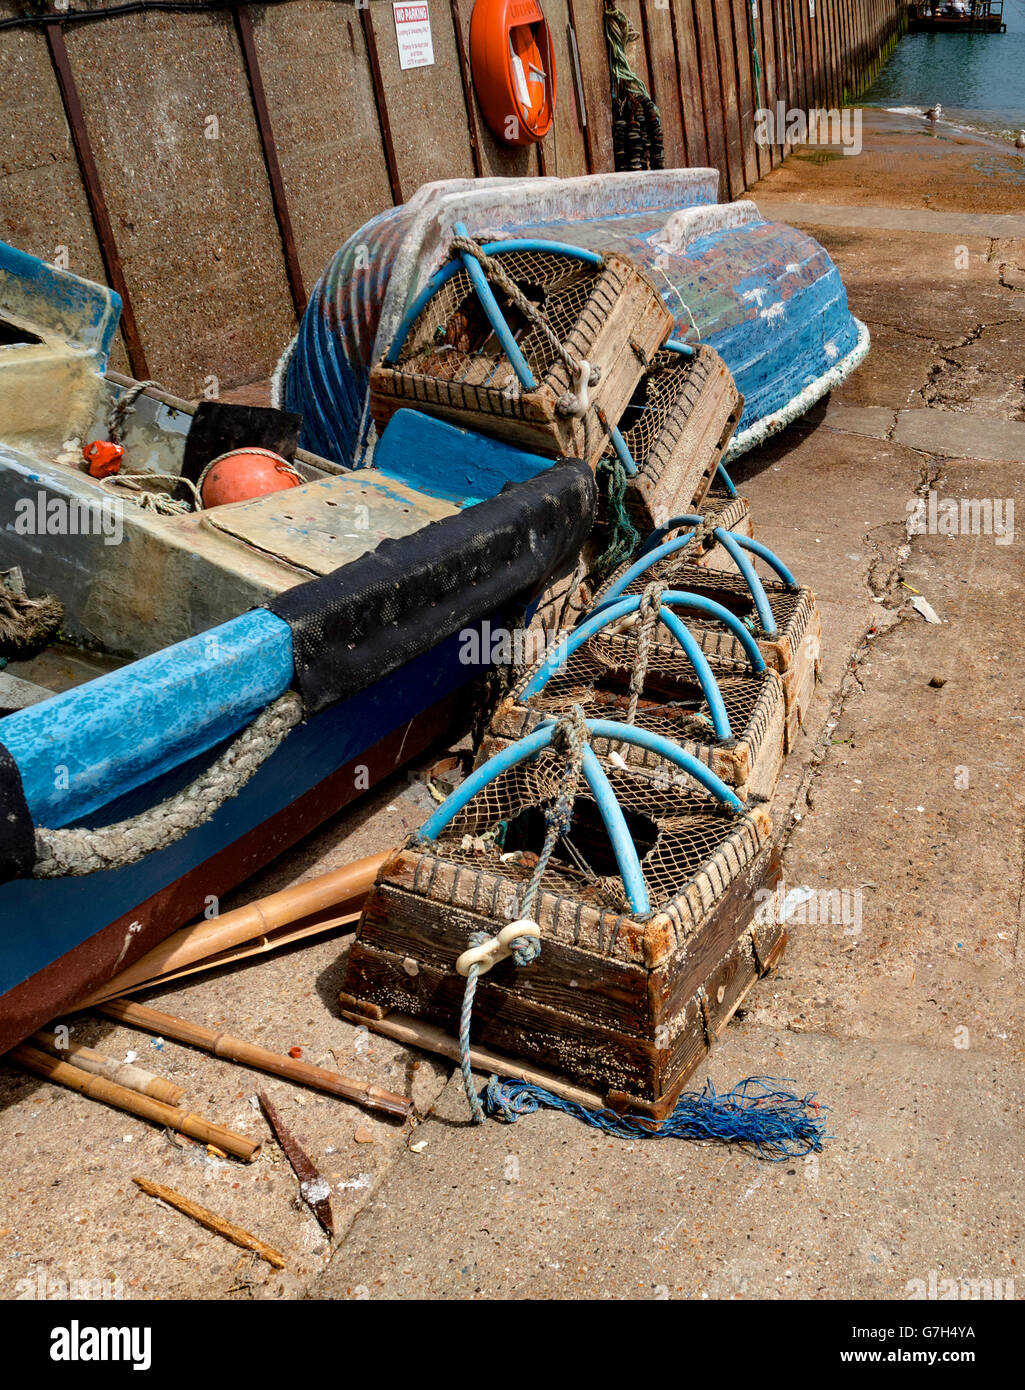 Lobster pots and an upturned boat on the quay side. Stock Photo